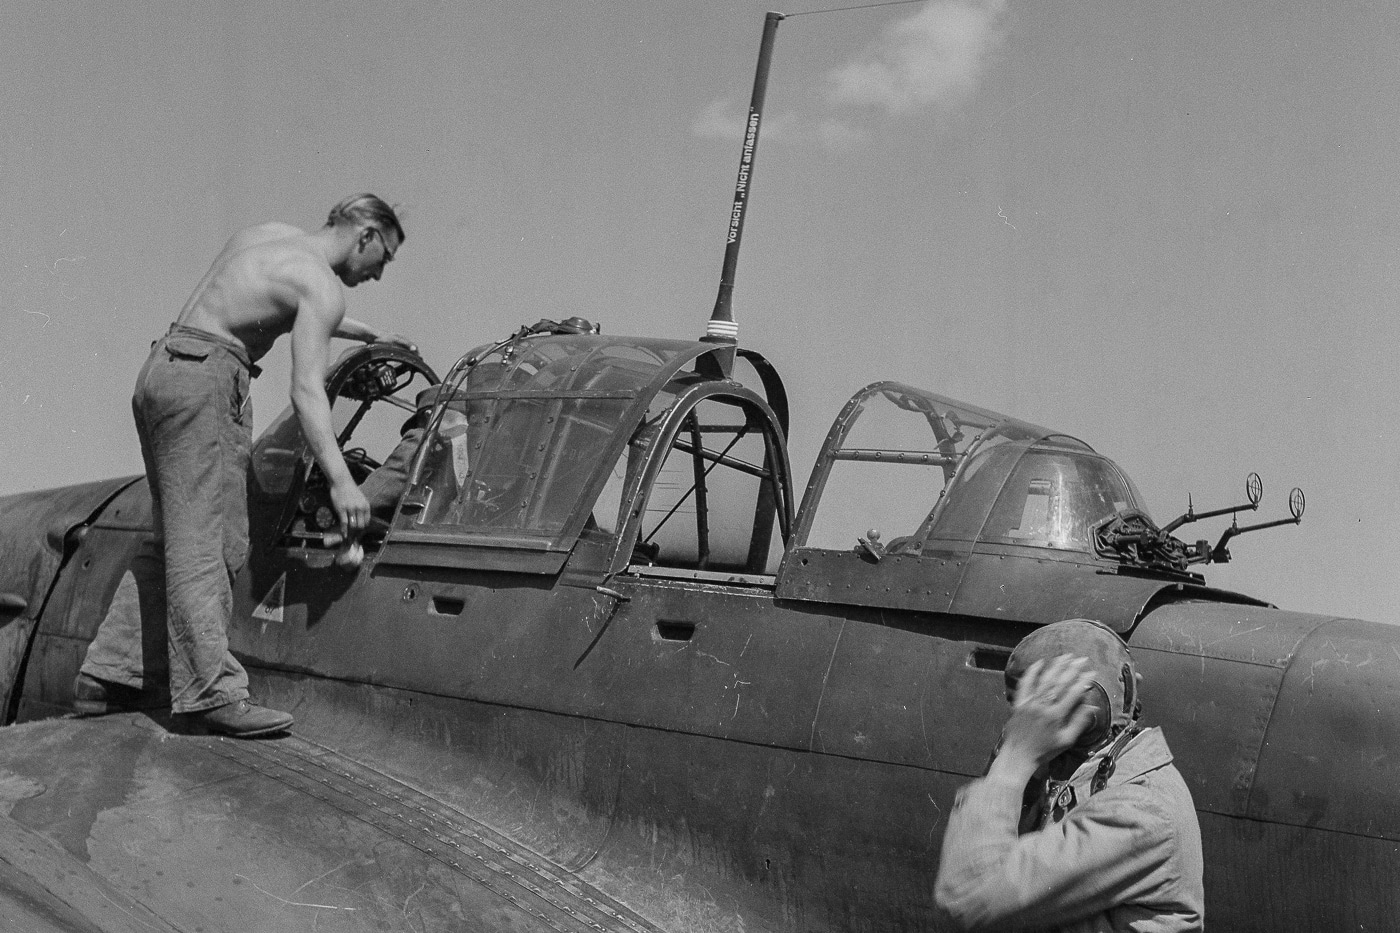 In this photograph, we see a Stuka crew preparing for a mission to destroy the bridges in the Battle of Tali–Ihantala. The Battle of Tali–Ihantala was part of the Finnish-Soviet Continuation War, which occurred during World War II. The battle was fought between Finnish forces — using war materiel provided by Germany — and Soviet forces.